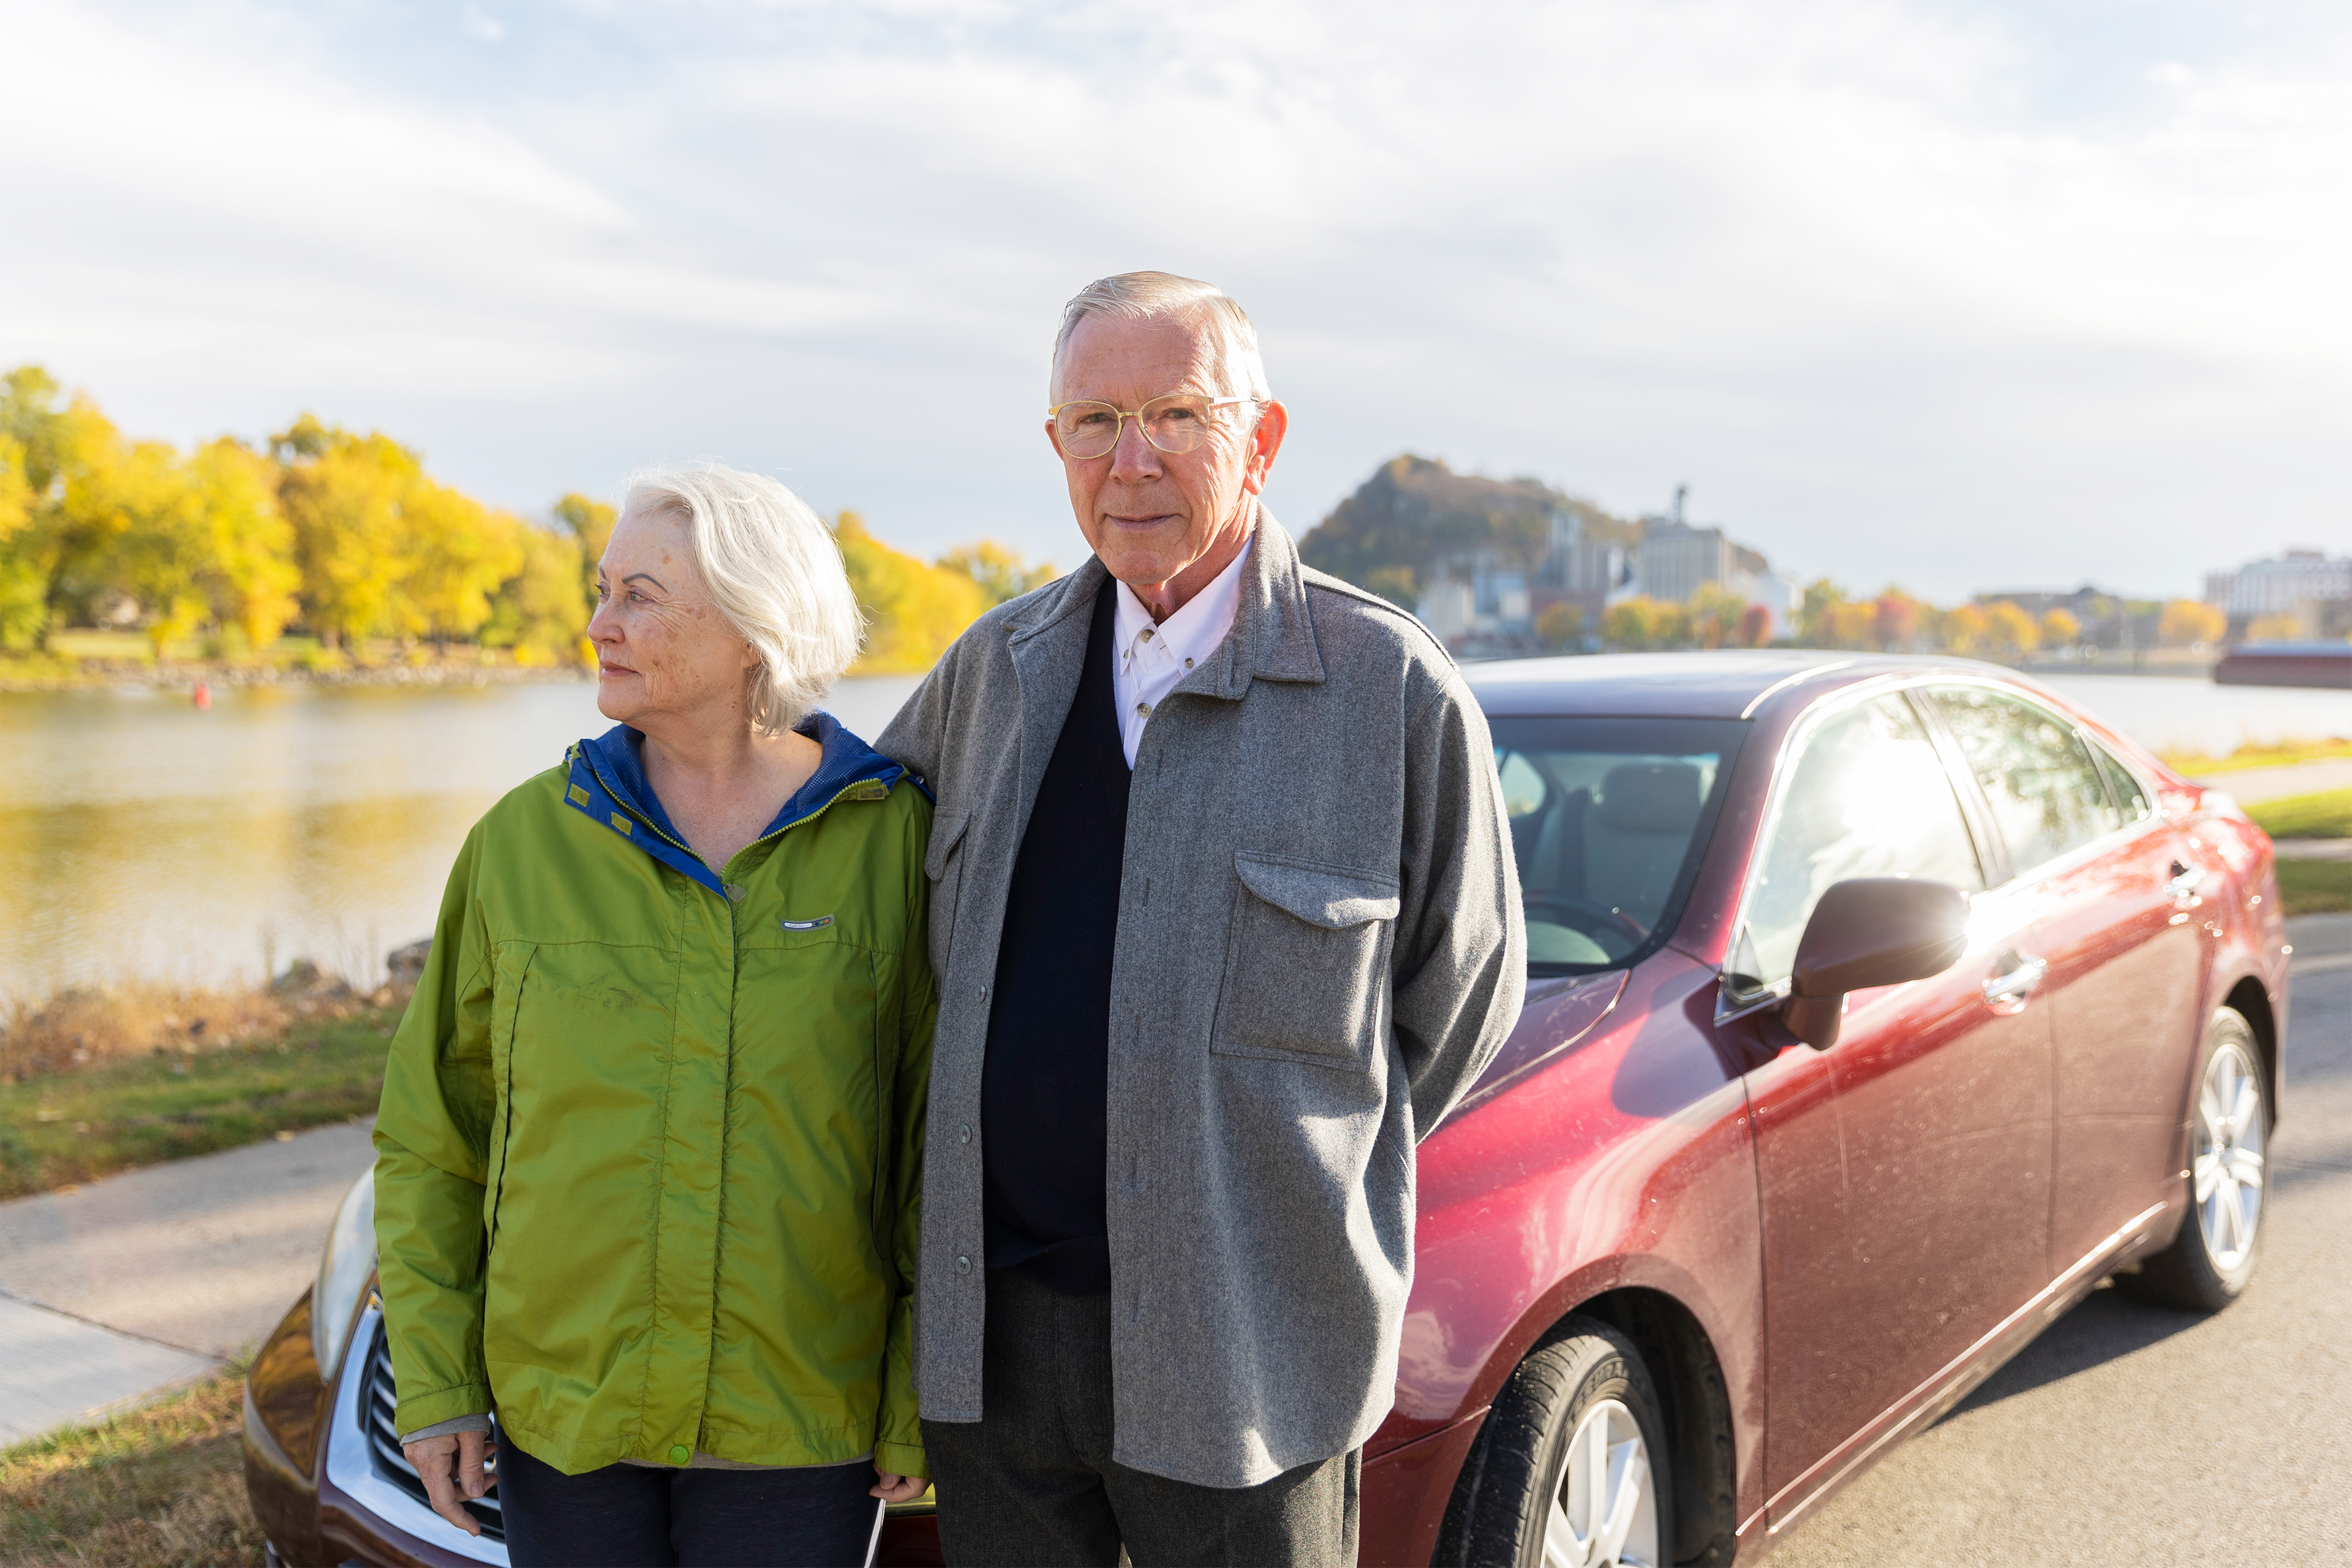 One photo shows Jim and Judie Maybach together standing outside their car.  The city of Red Wing, Minnesota, is seen behind them.